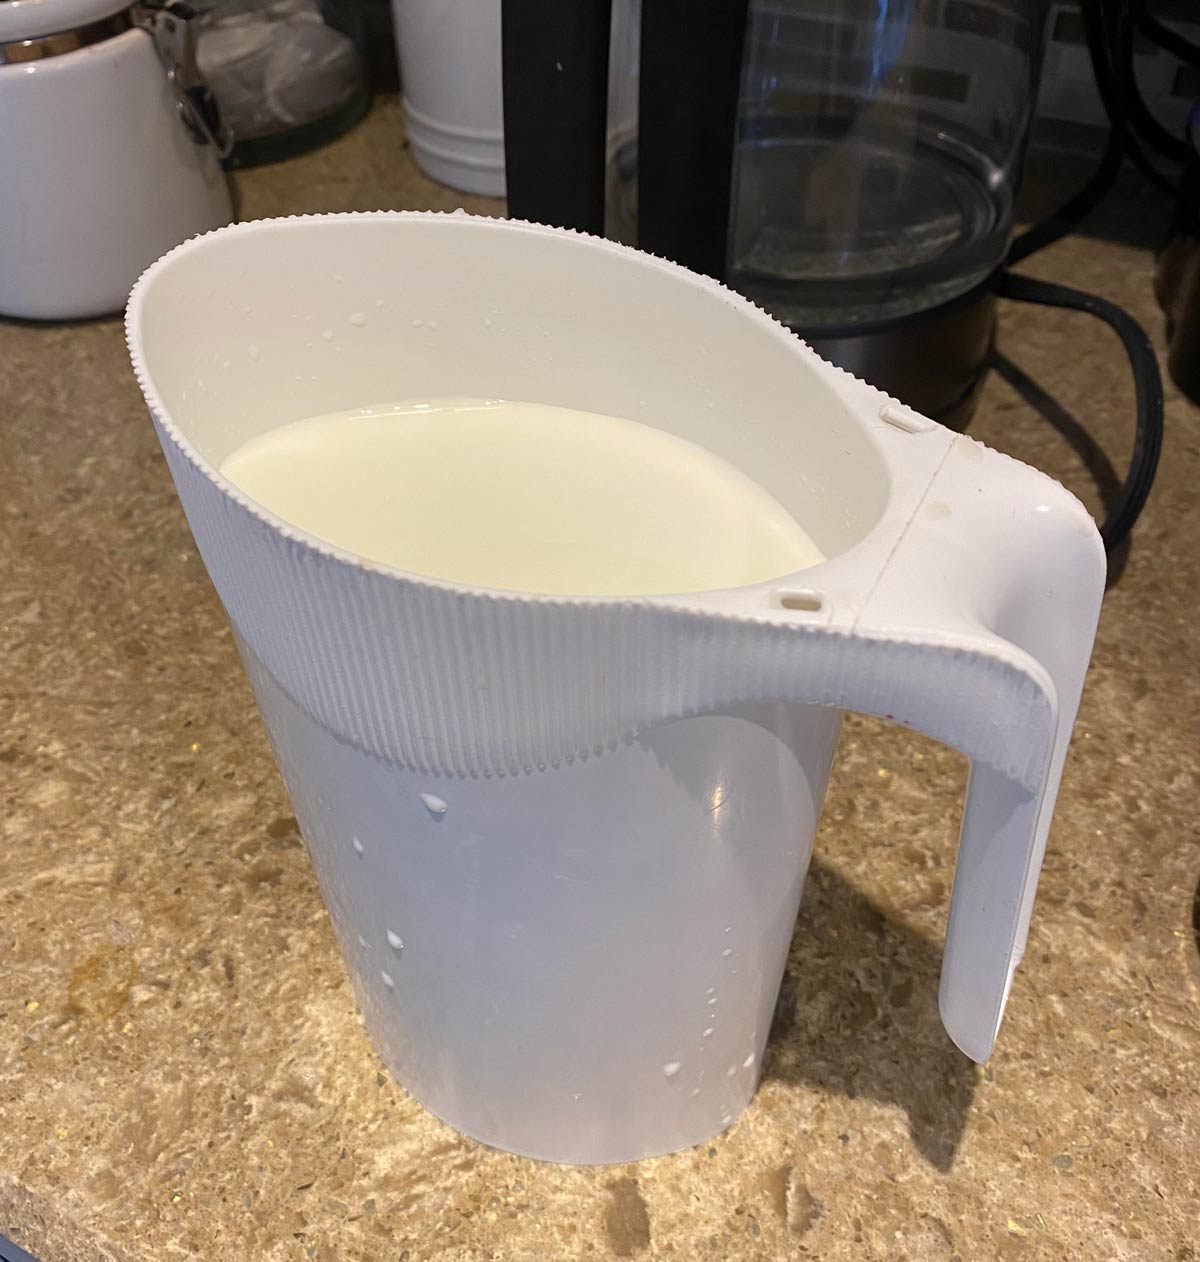 Apparently I need to explain to the in-laws how bagged milk works